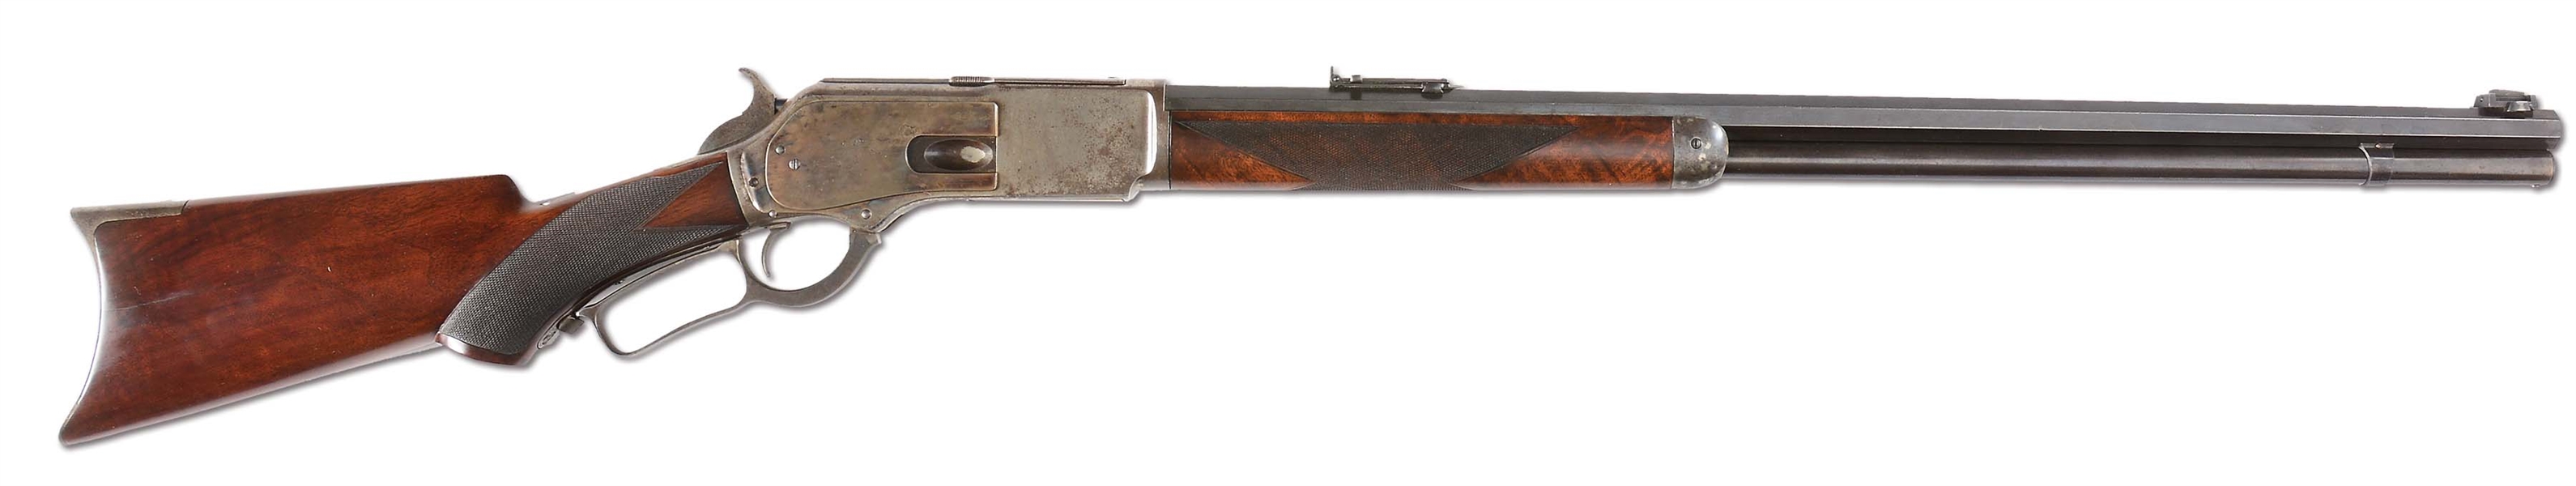 (A) WINCHESTER MODEL 1876 DELUXE LEVER ACTION SPORTING RIFLE (1883).